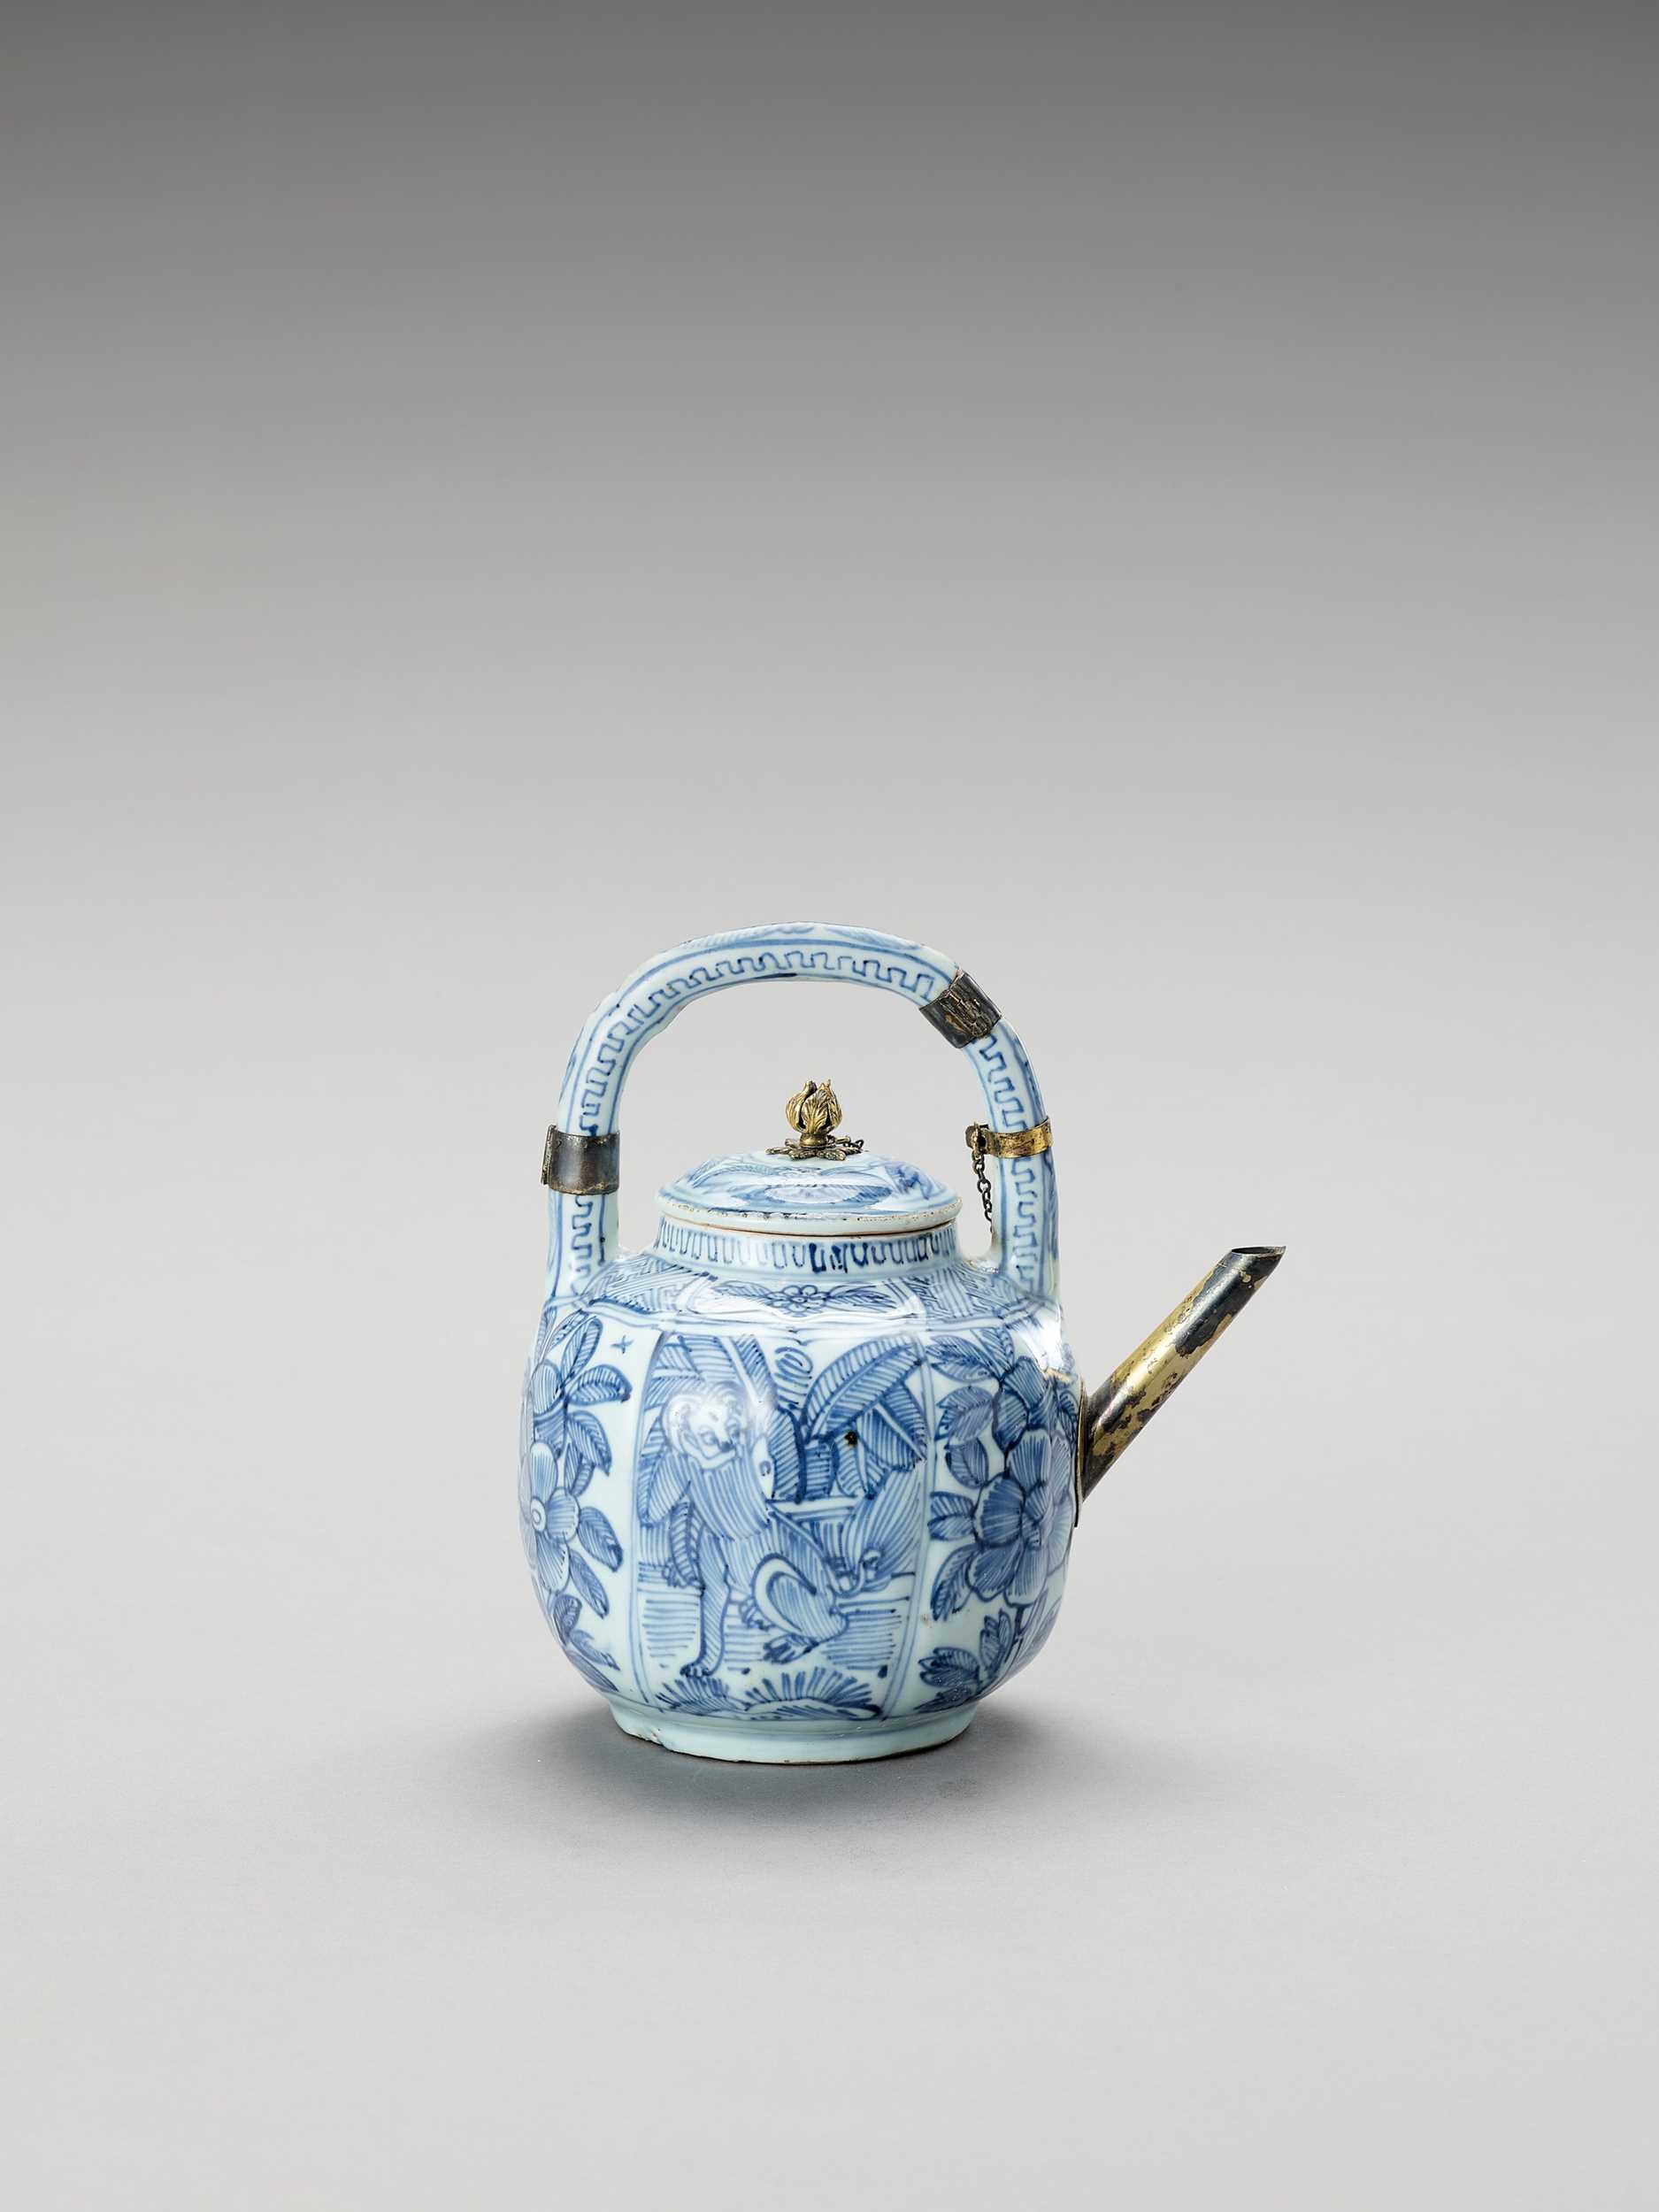 Lot 1086 - A SILVER-MOUNTED BLUE AND WHITE PORCELAIN TEAPOT